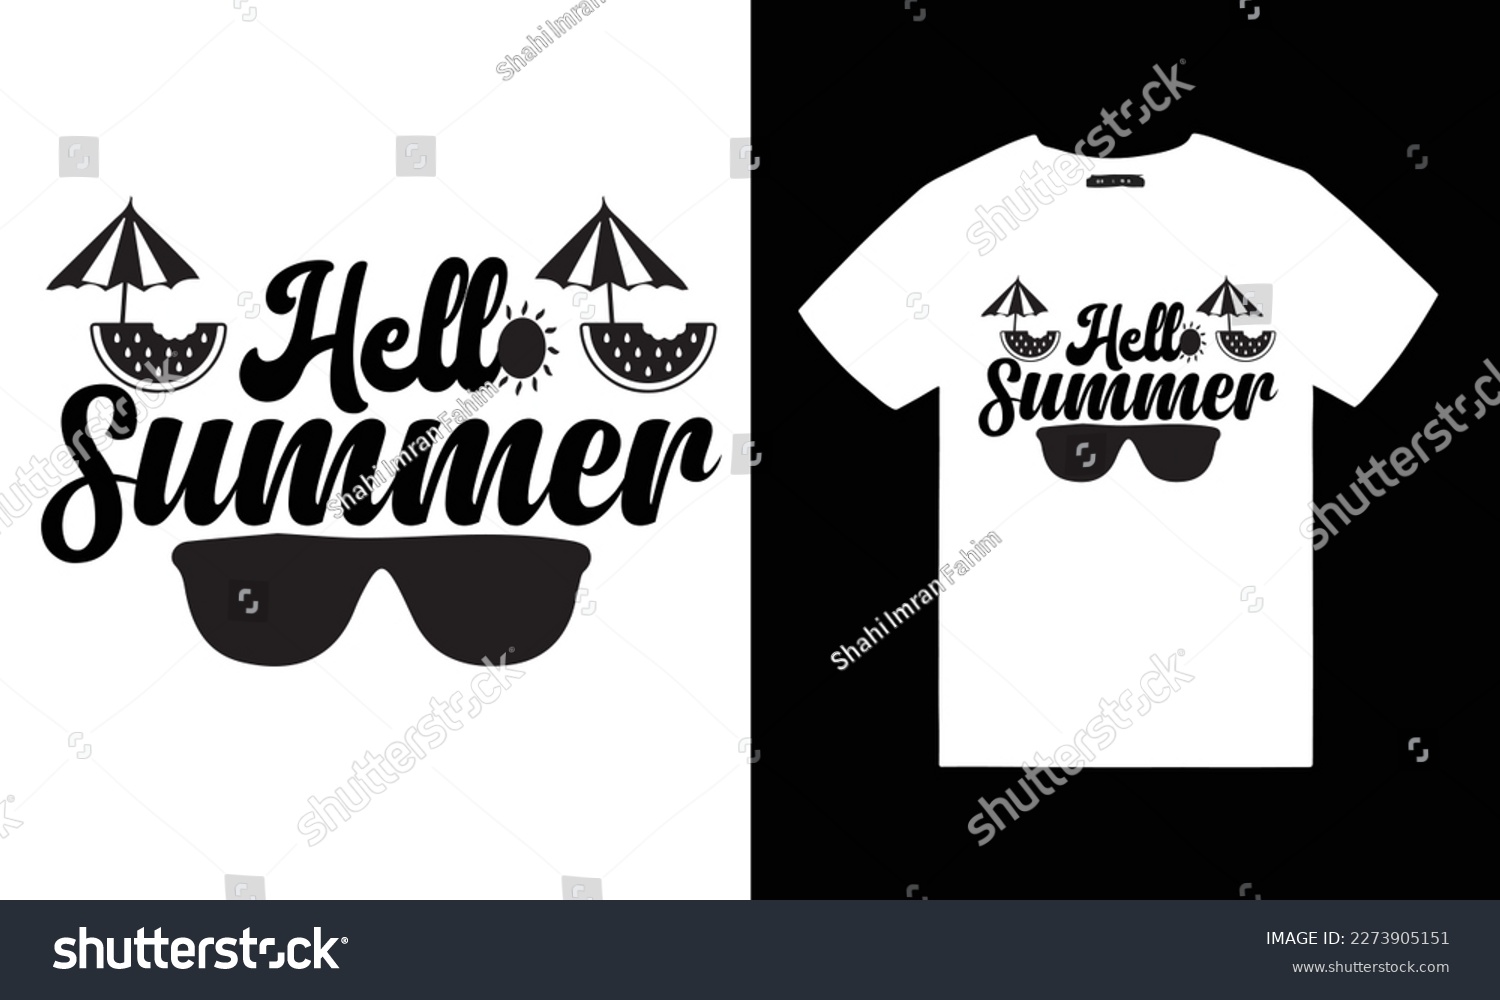 SVG of Summer t shirt design
California, Los Angeles t-shirt design. T shirt print design with palm tree. T-shirt design with typography and tropical palm tree for tee print, apparel and clothing svg